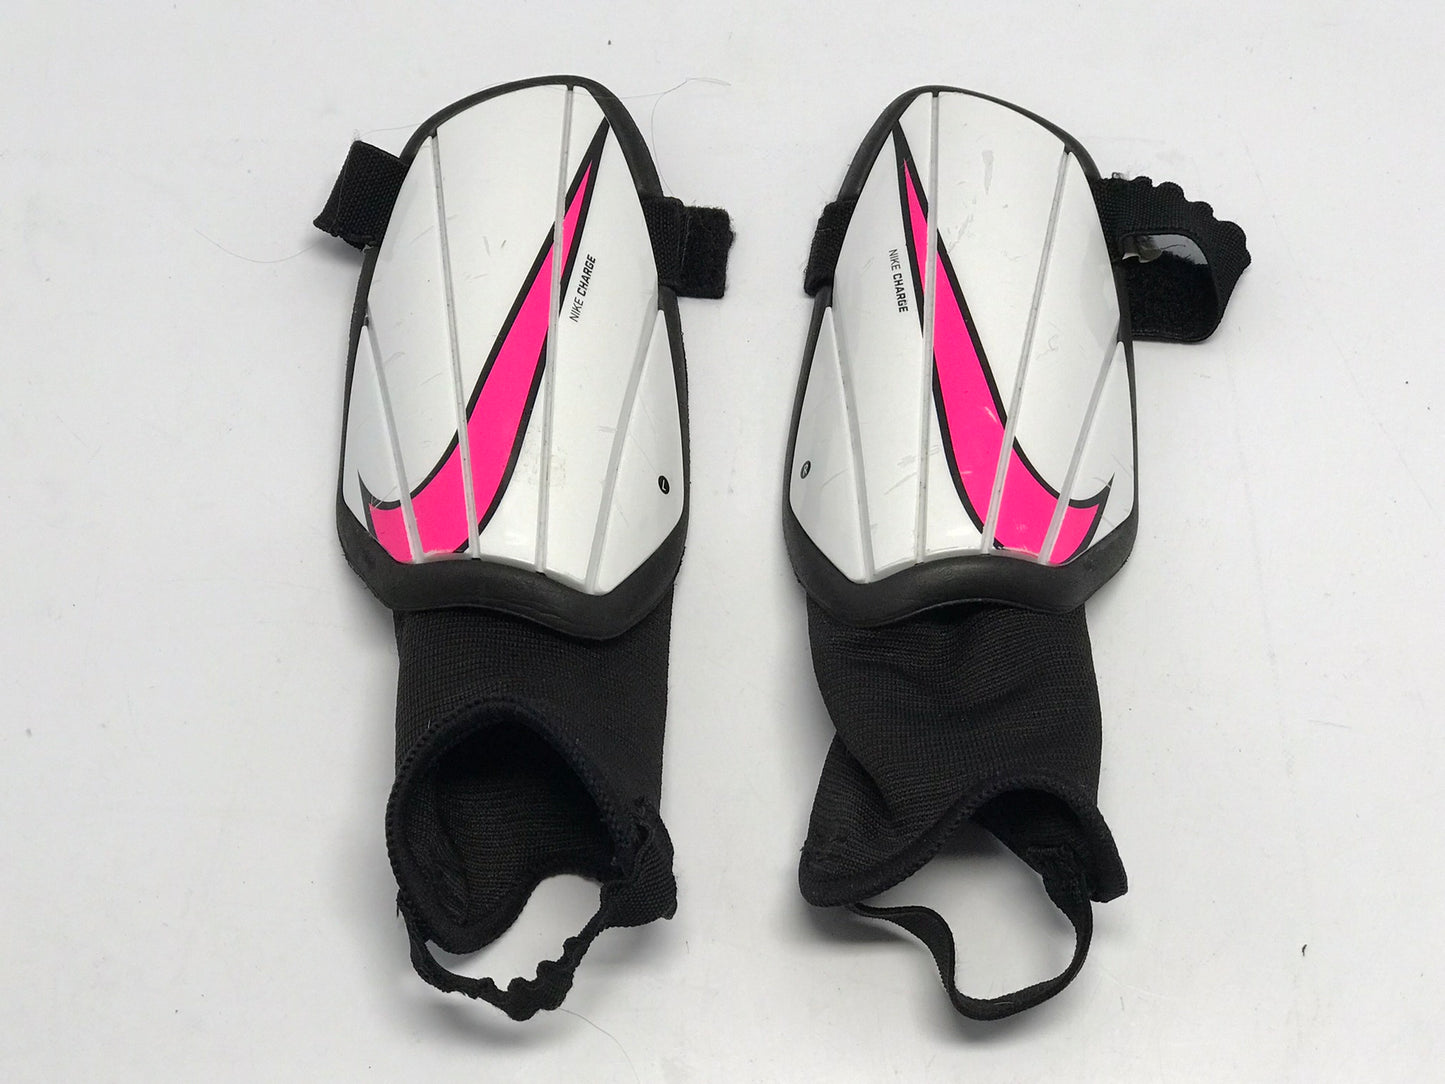 Soccer Shin Pad Child Size 4-6 Nike Black White Pink Excellent